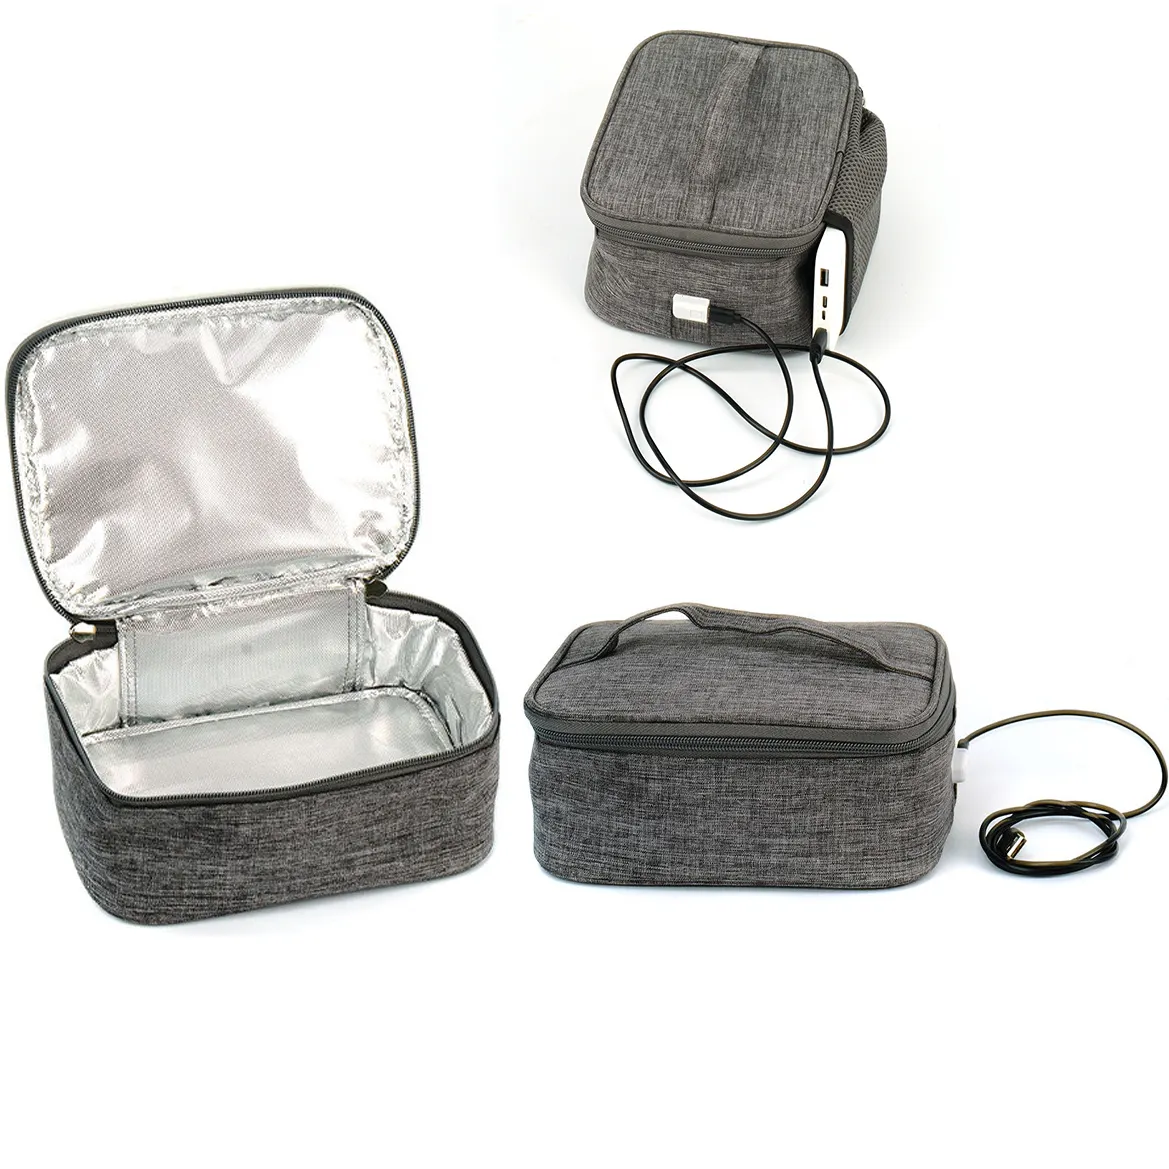 Portable Waterproof Food Warmer Personal Portable Oven Mini USB Heated Lunch Box for Reheating